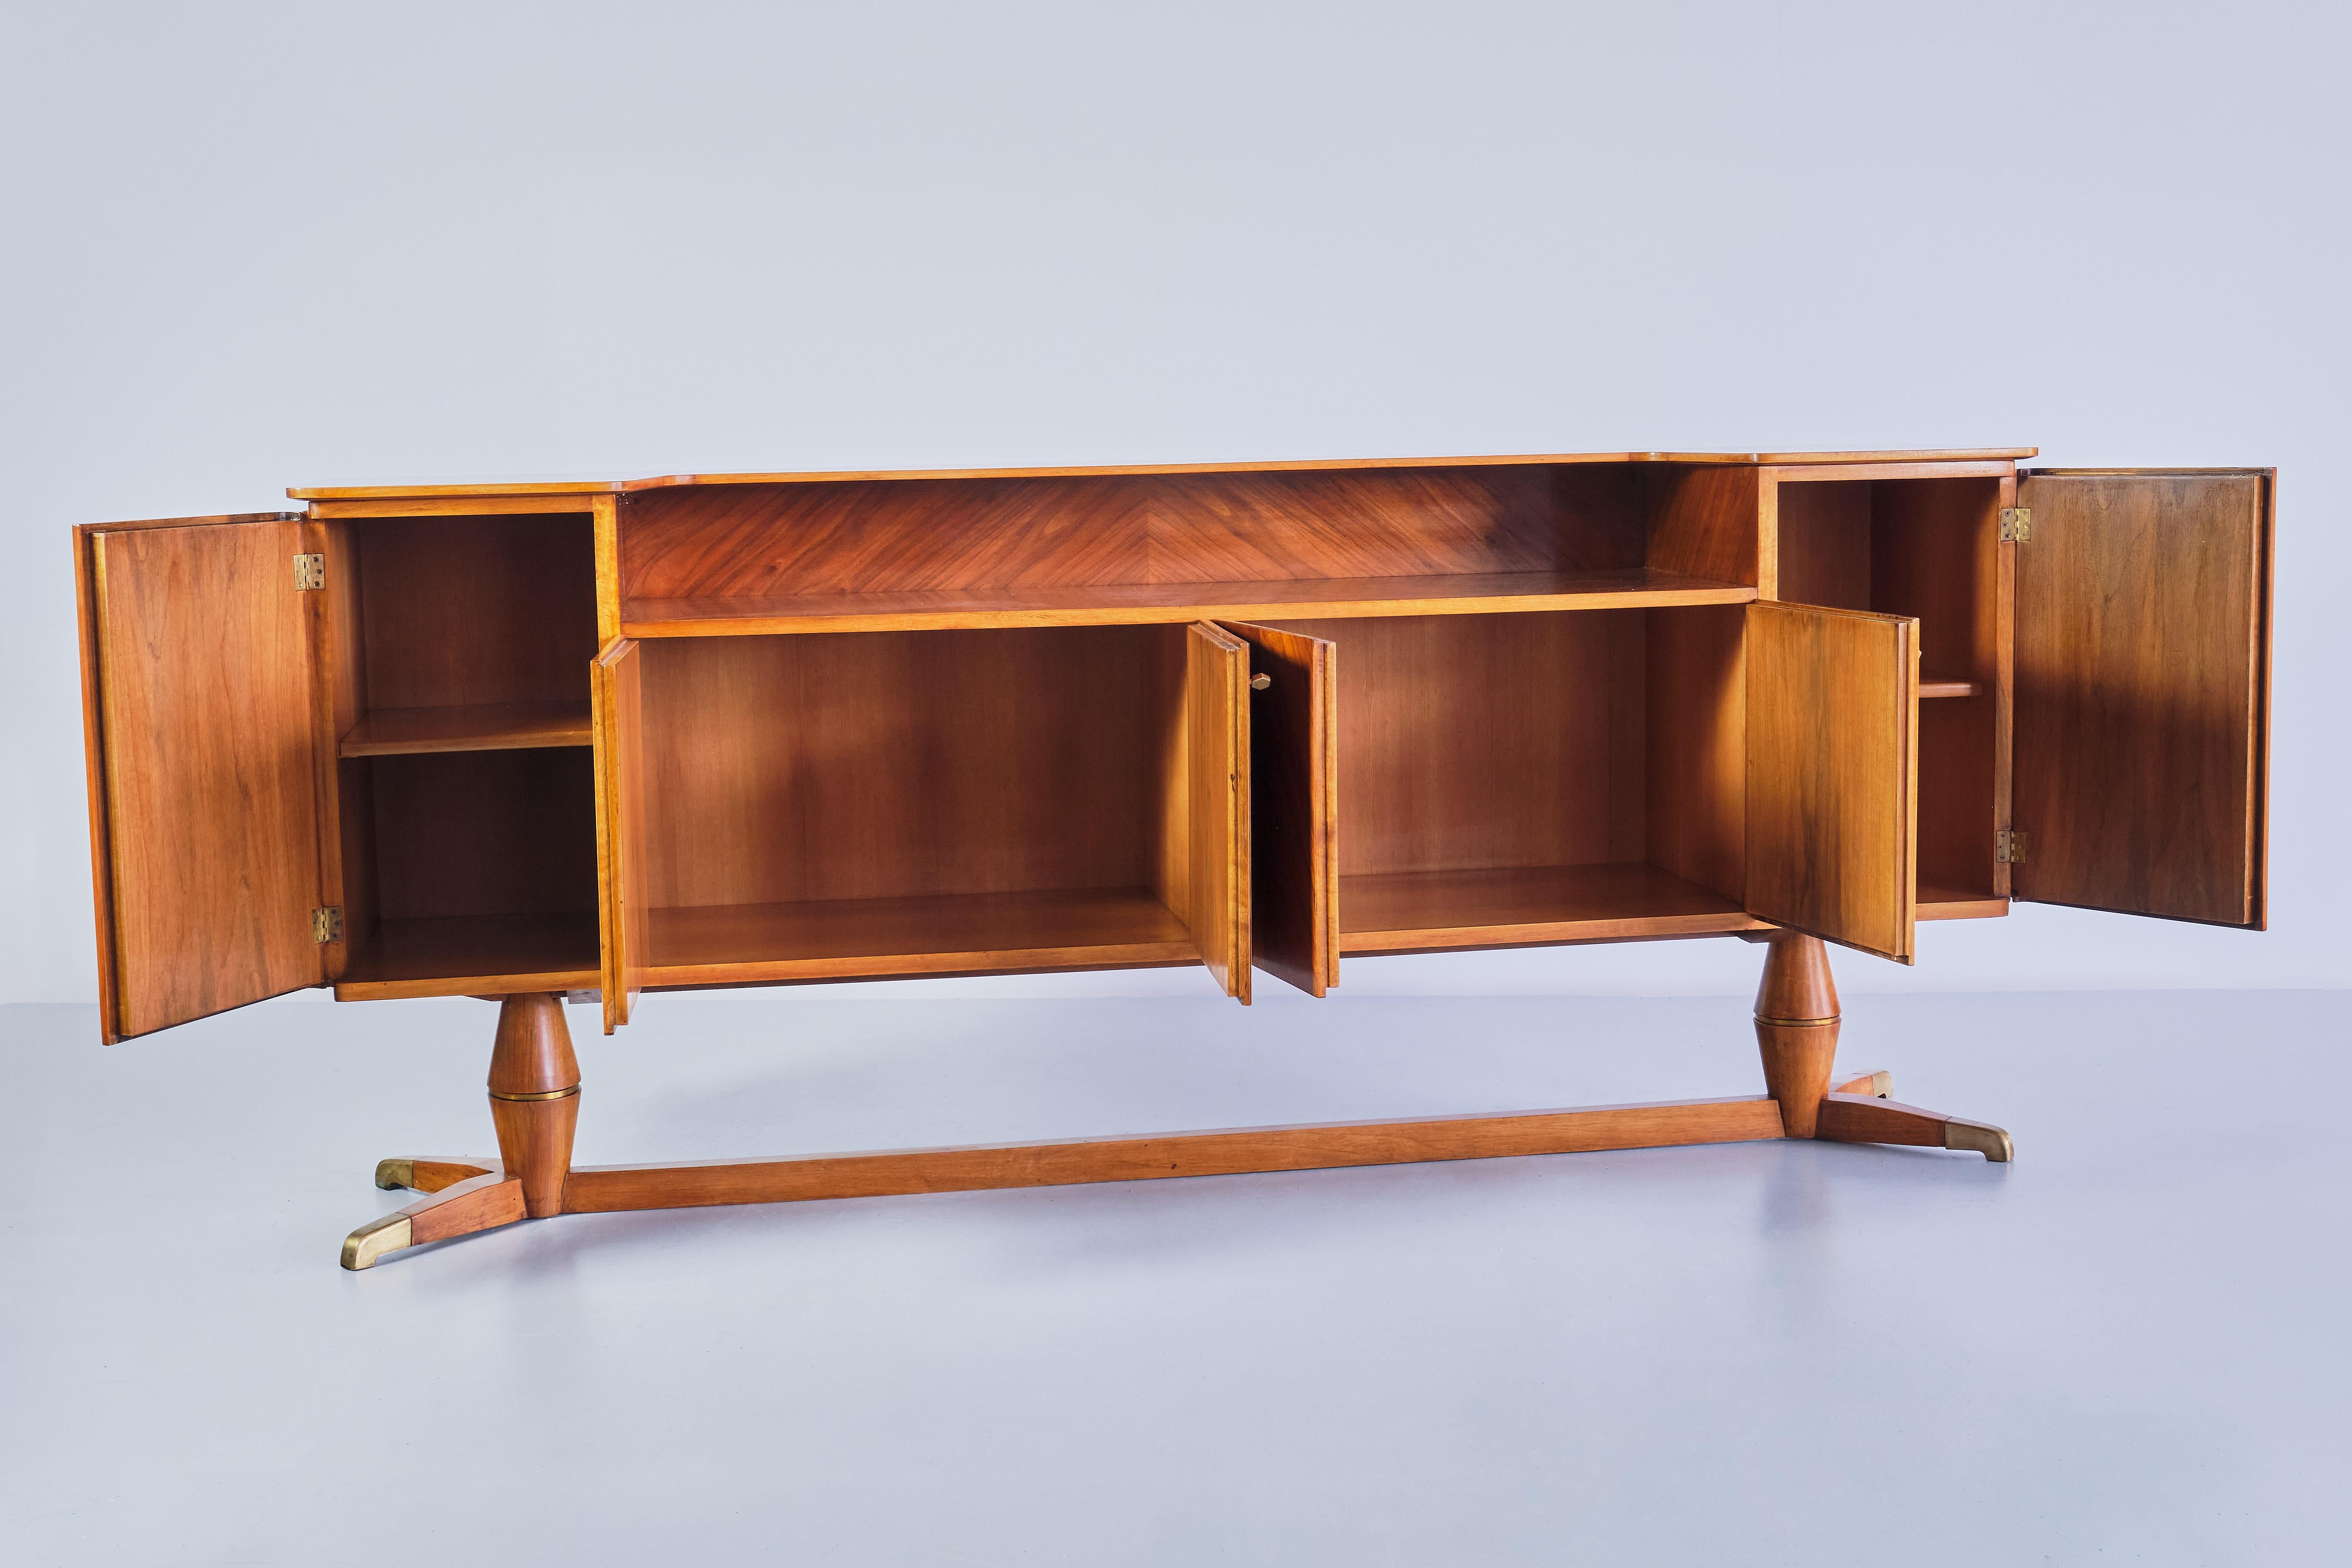 Paolo Buffa Attributed Sideboard in Walnut and Brass, Serafino Arrighi, 1940s For Sale 10